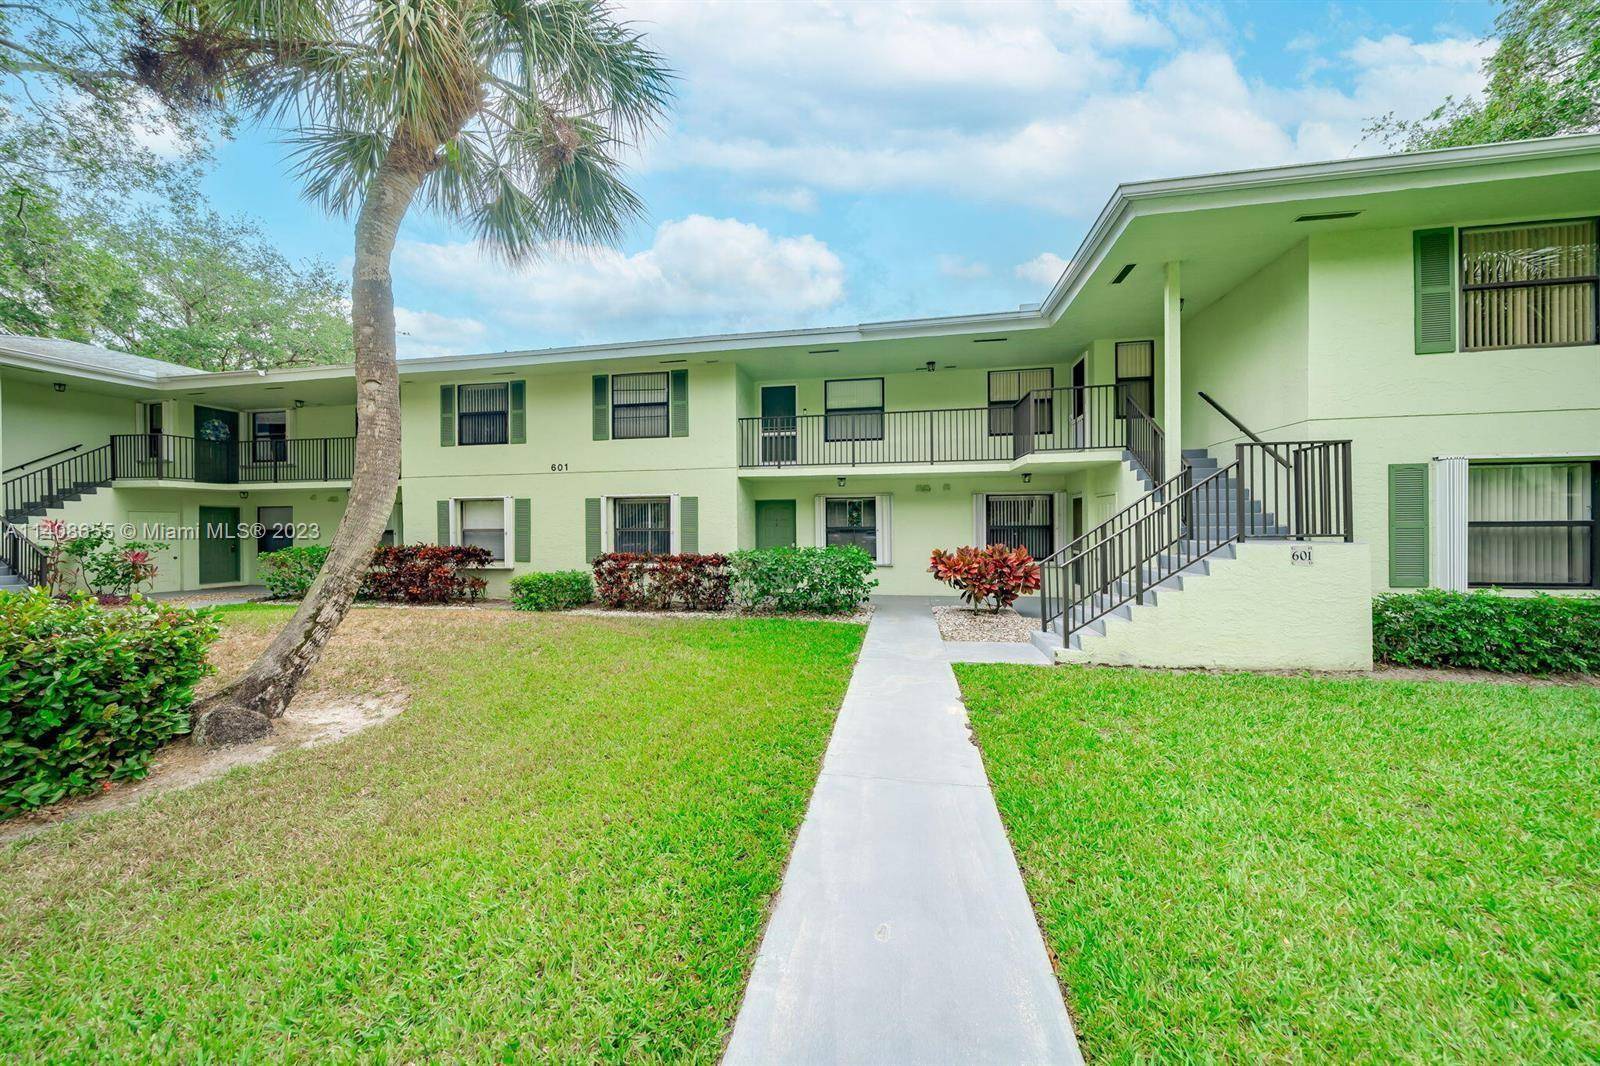 Bright and Airy, Turnkey, 2 Bedroom, 2 Bath, First Floor LAKEFRONT MODEL B CONDO in Sought After Sabal Ridge at Palm Beach Gardens.